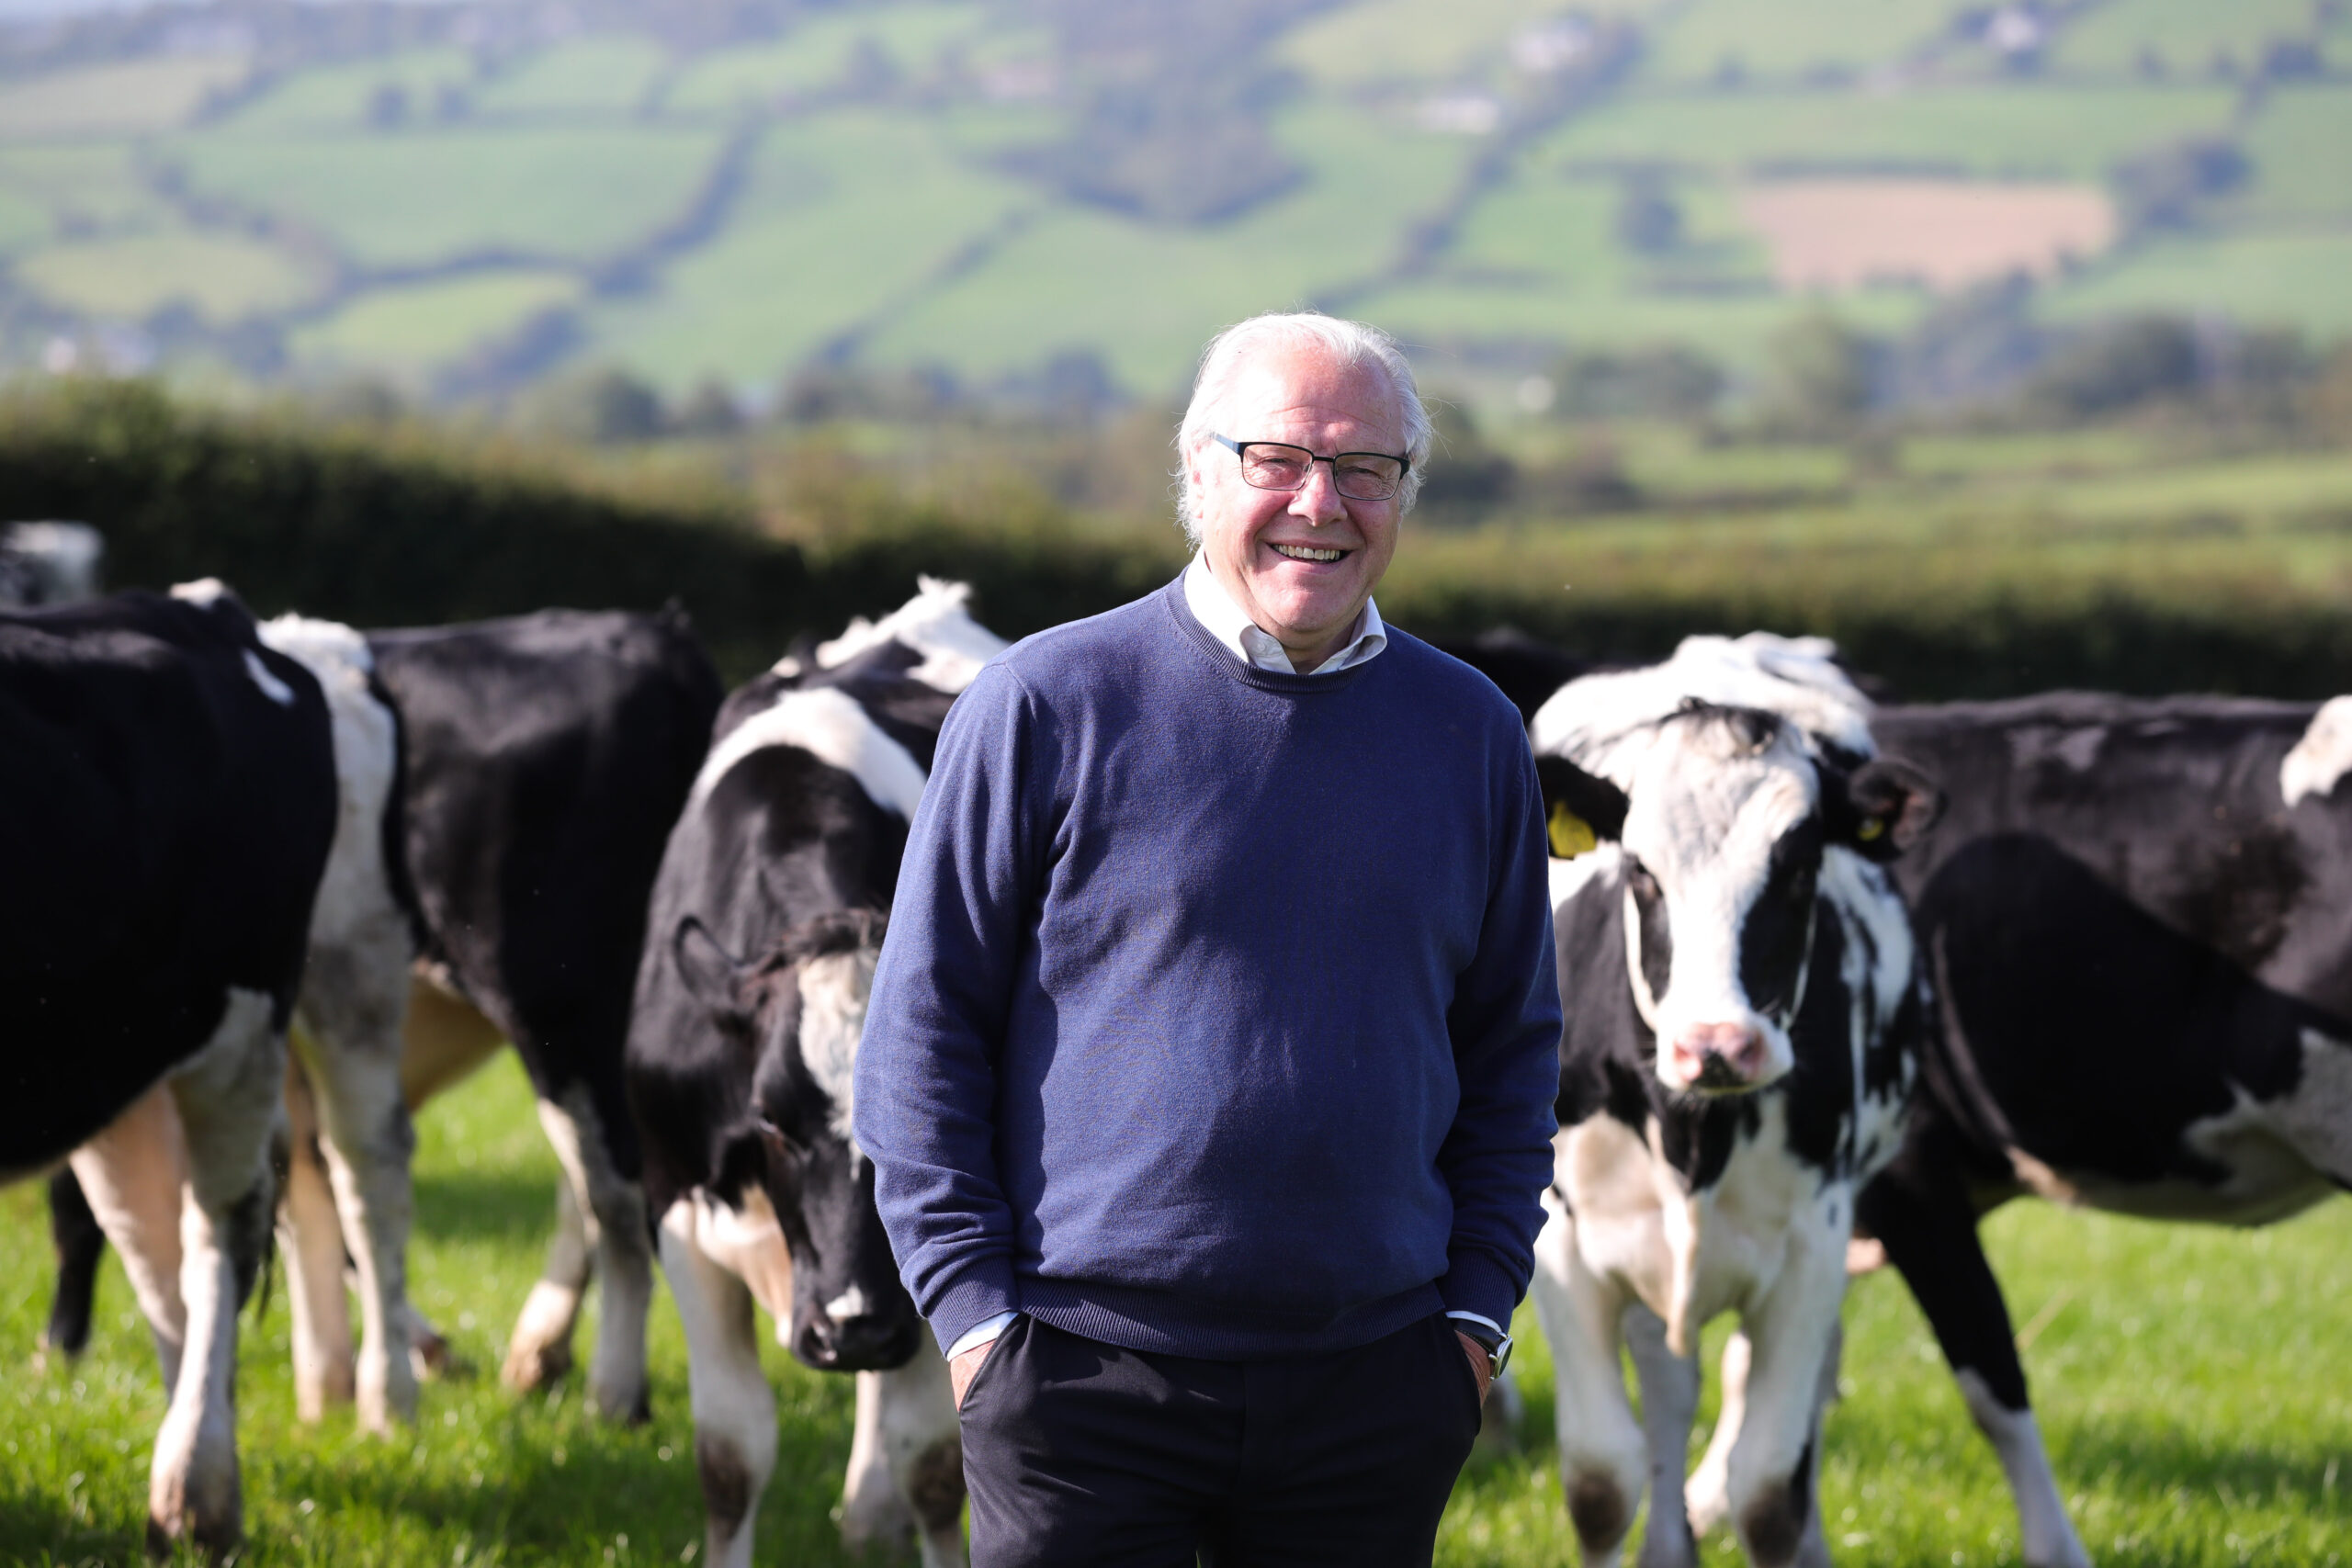 Dairy Council NI launches new EU Sustainable Dairy Programme - Newry Times - news newry northern ireland